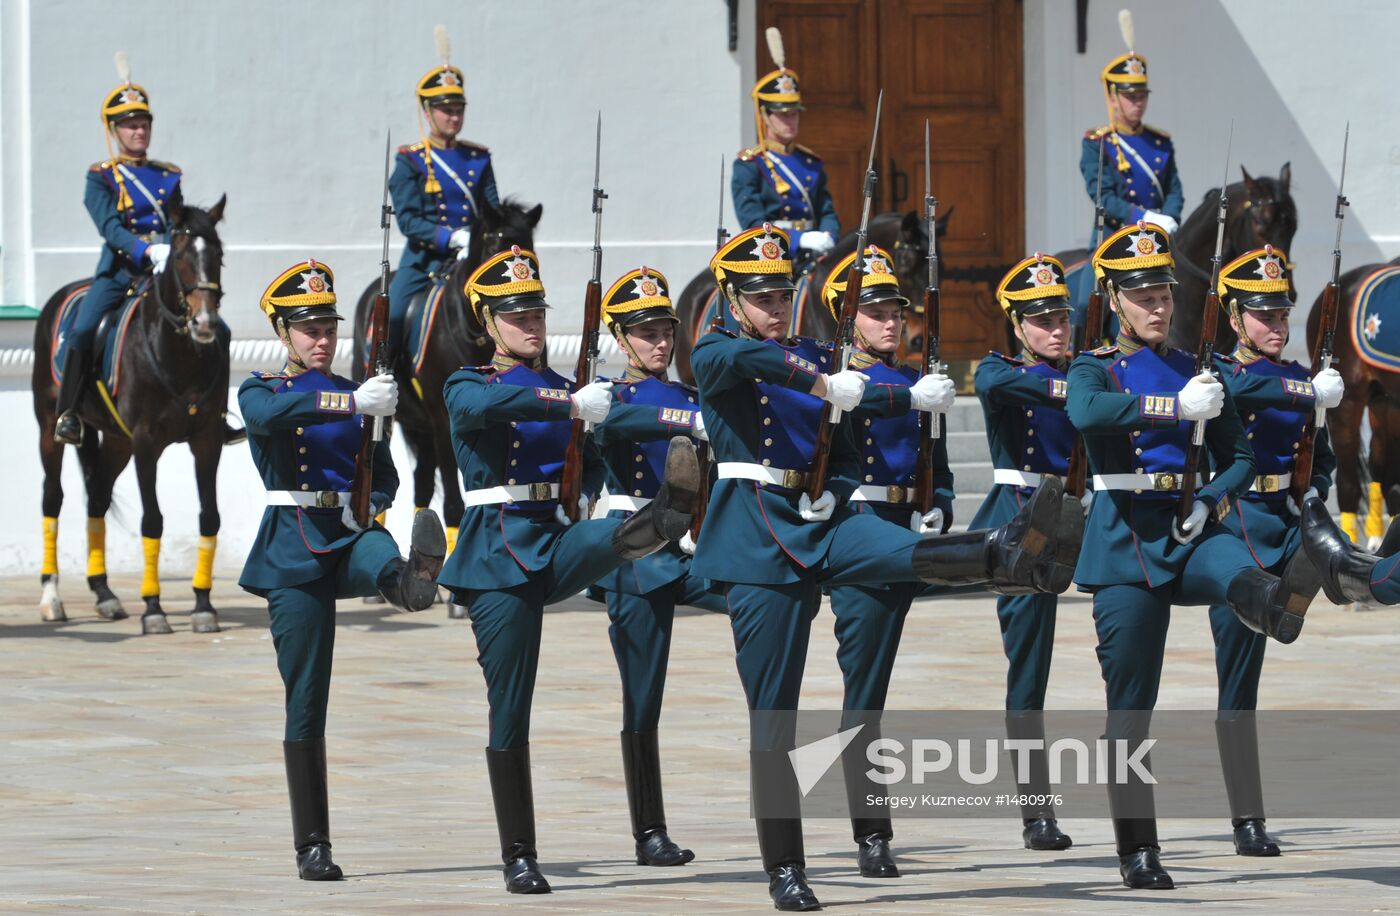 Guard mounting ceremony in Moscow's Kremlin